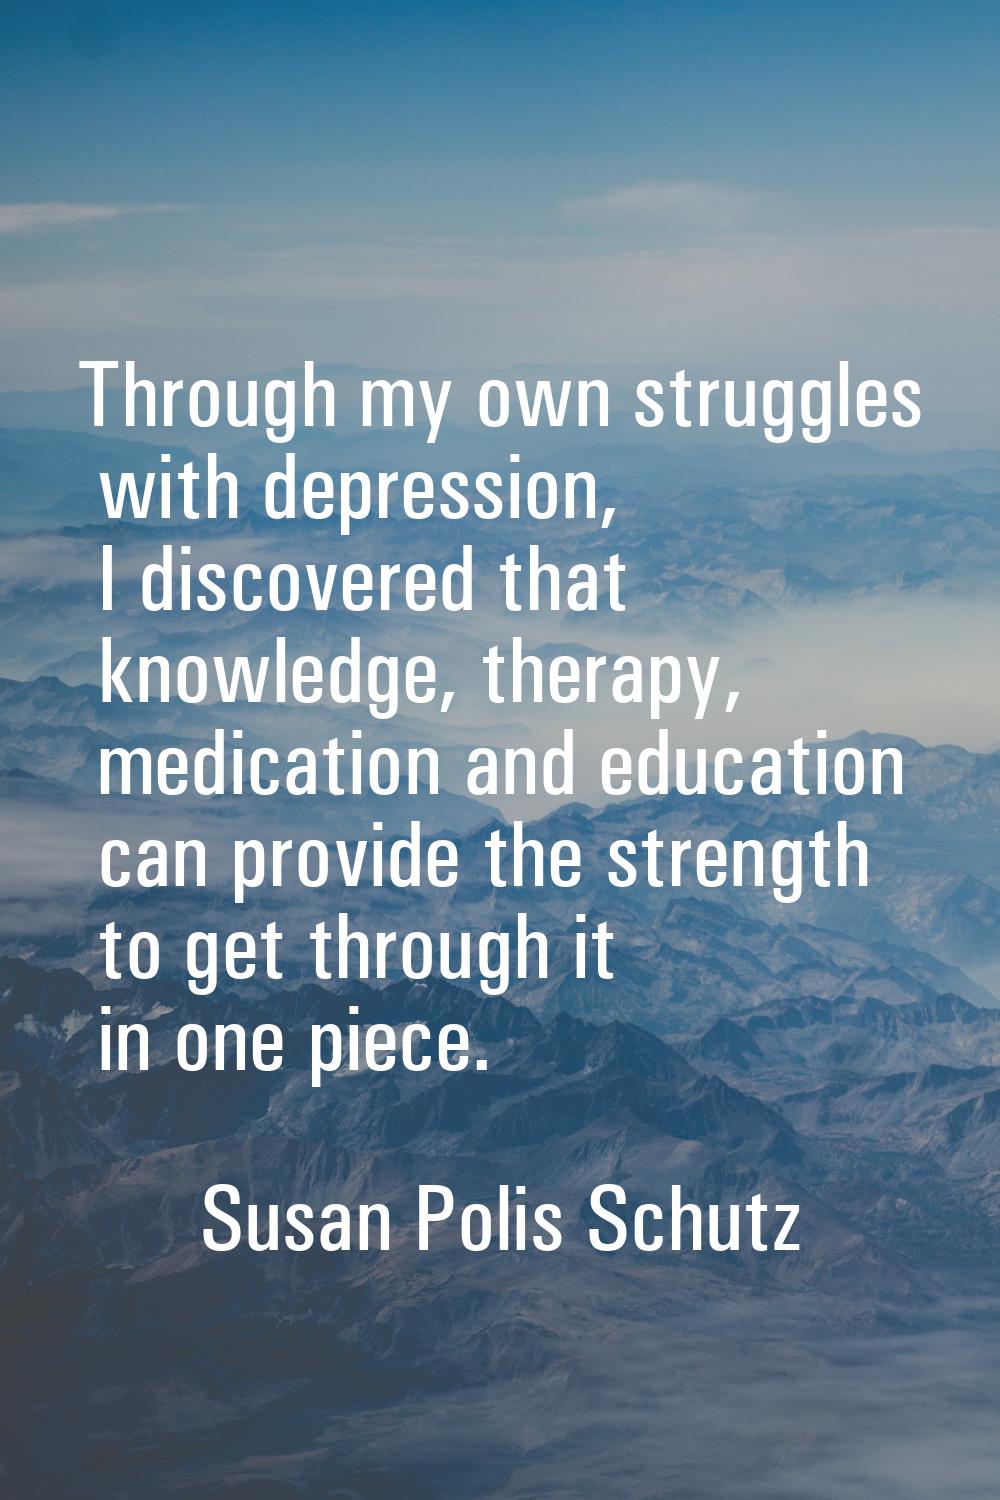 Through my own struggles with depression, I discovered that knowledge, therapy, medication and educ